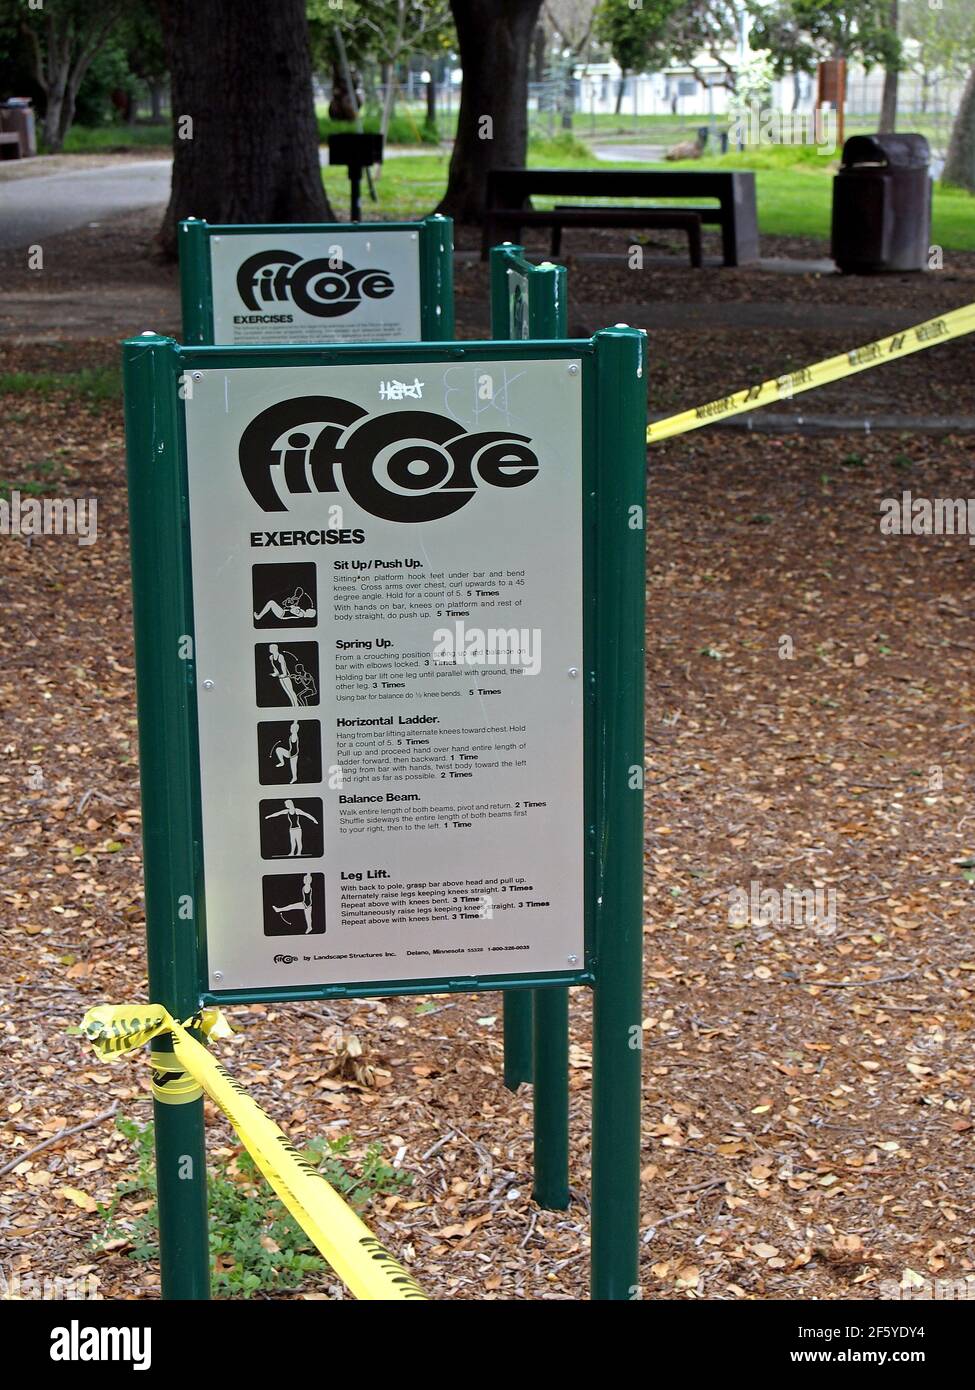 fitcore, exercise area sealed off with yellow caution tape due to covid 19 pandemic in Cann Park in Union City, California, Stock Photo